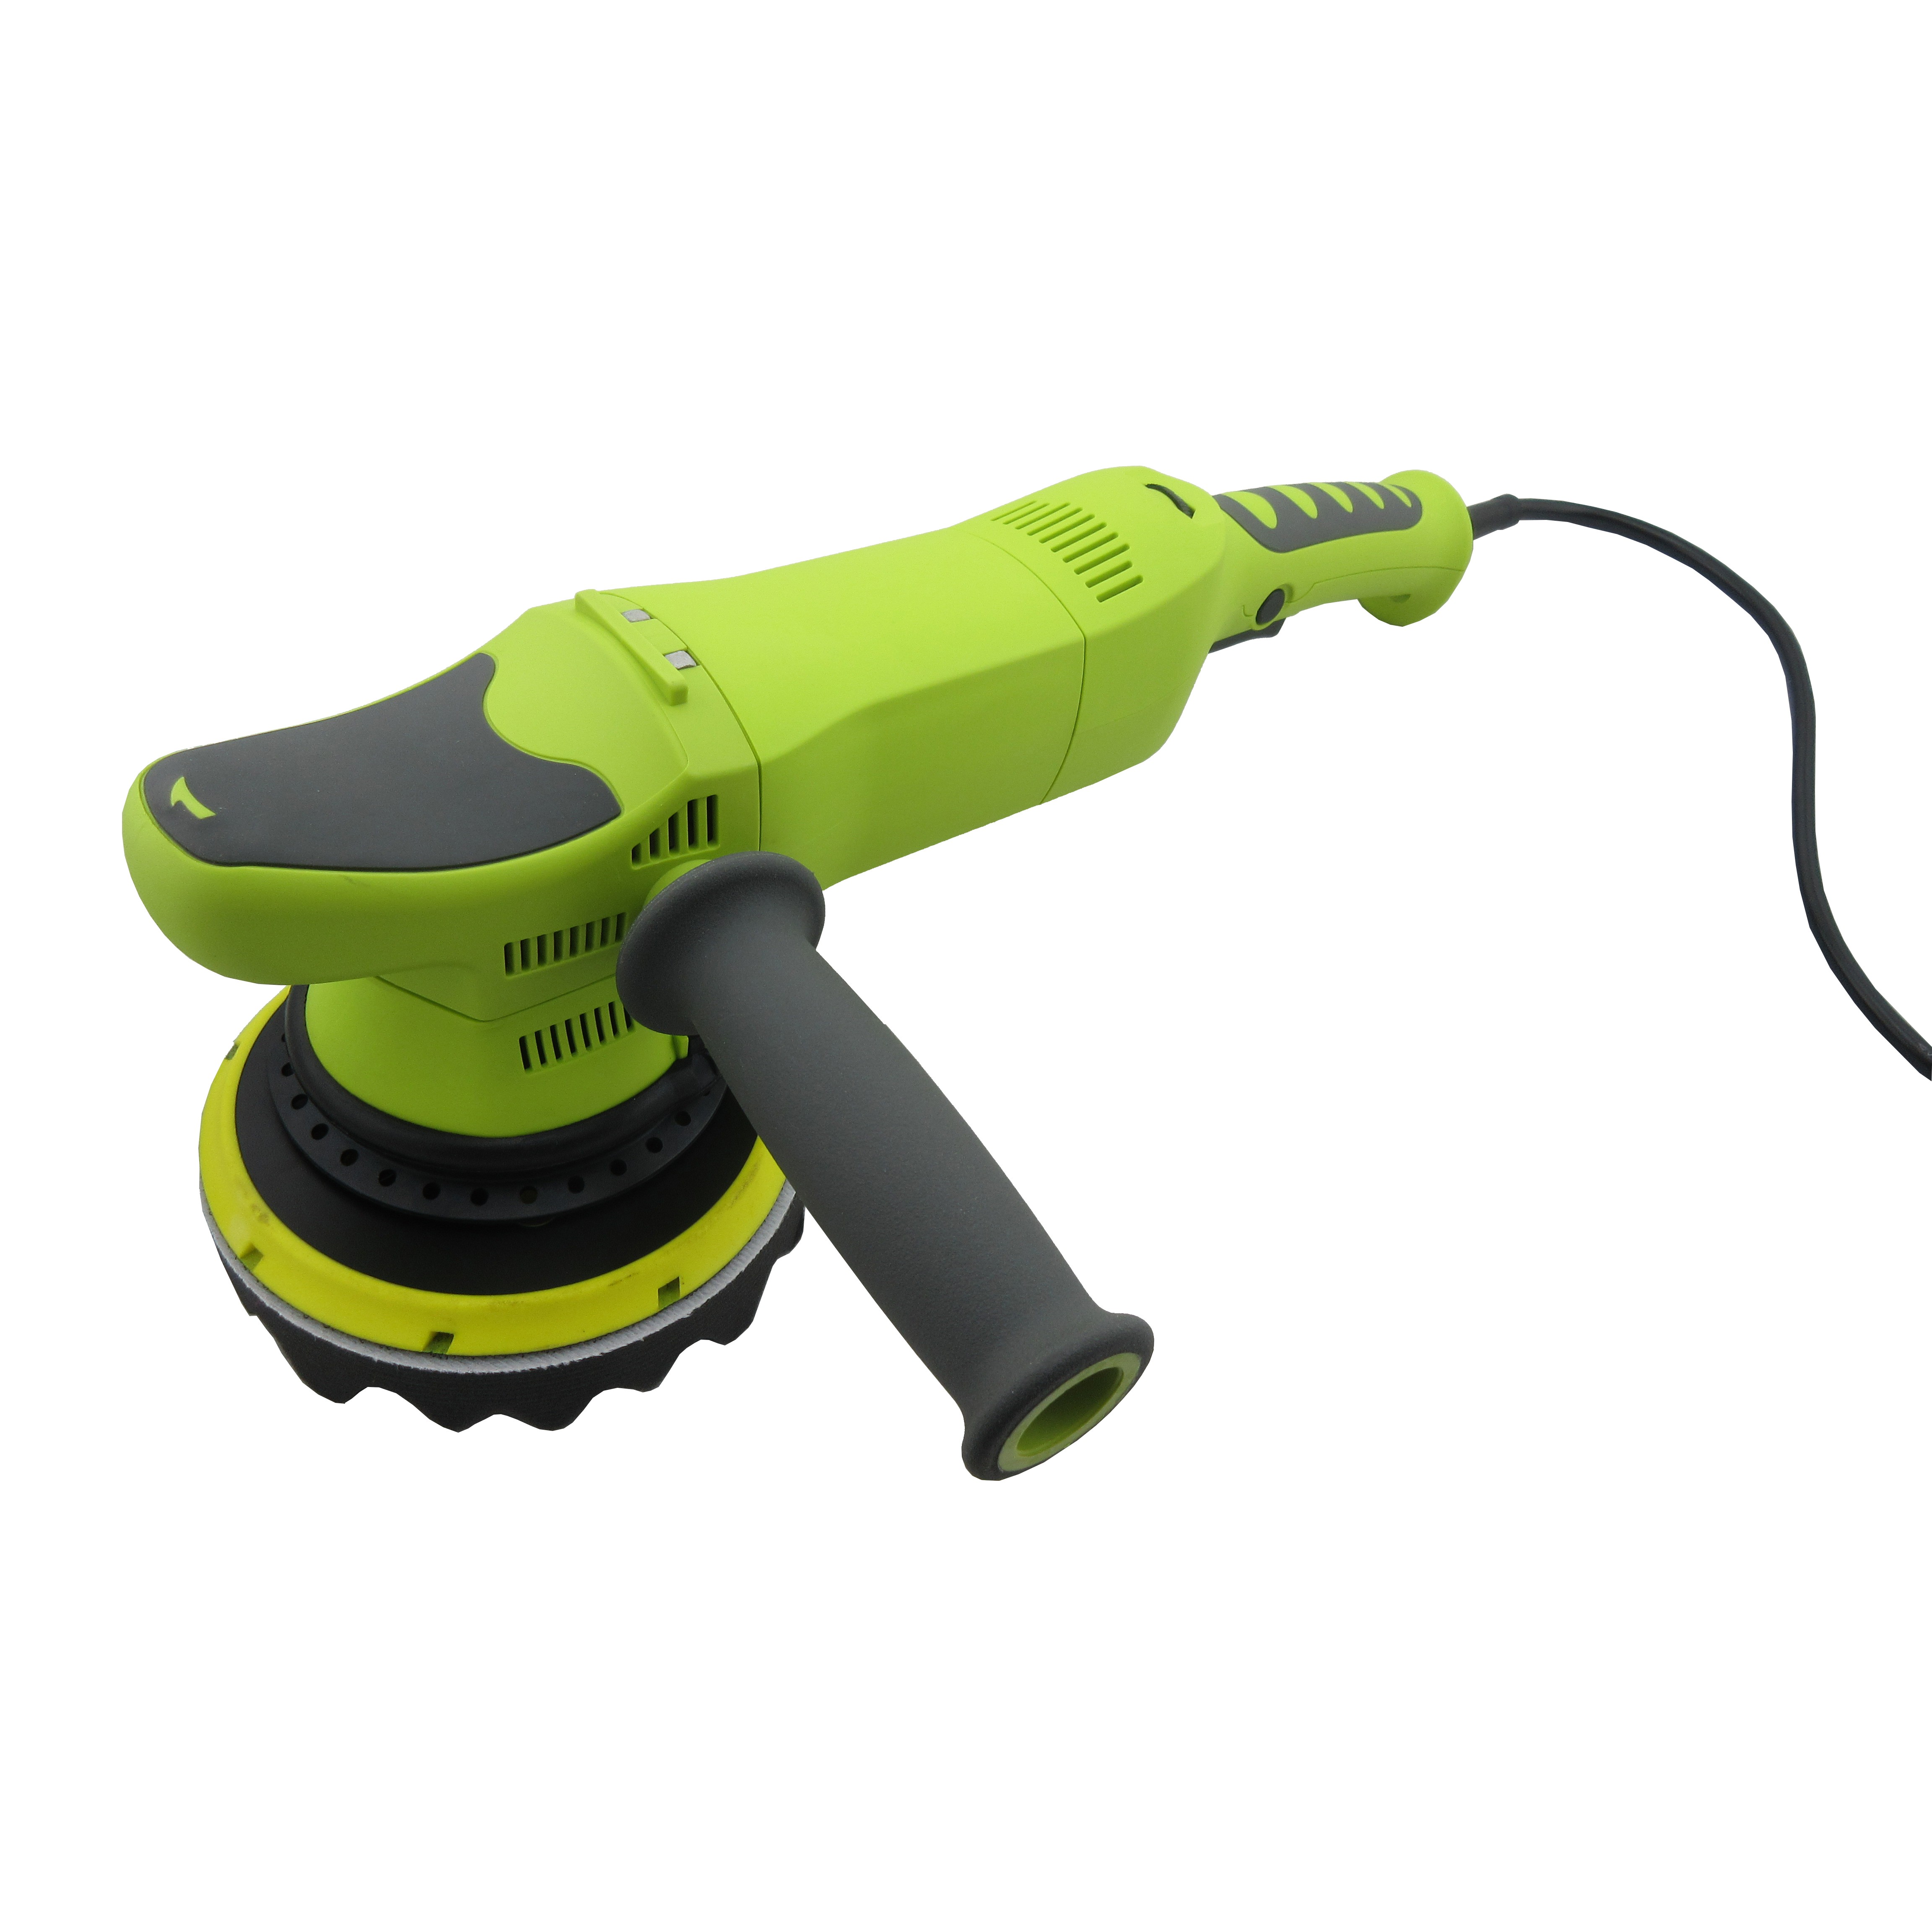 New design 800W dual action car polisher with 21mm eccentric distance